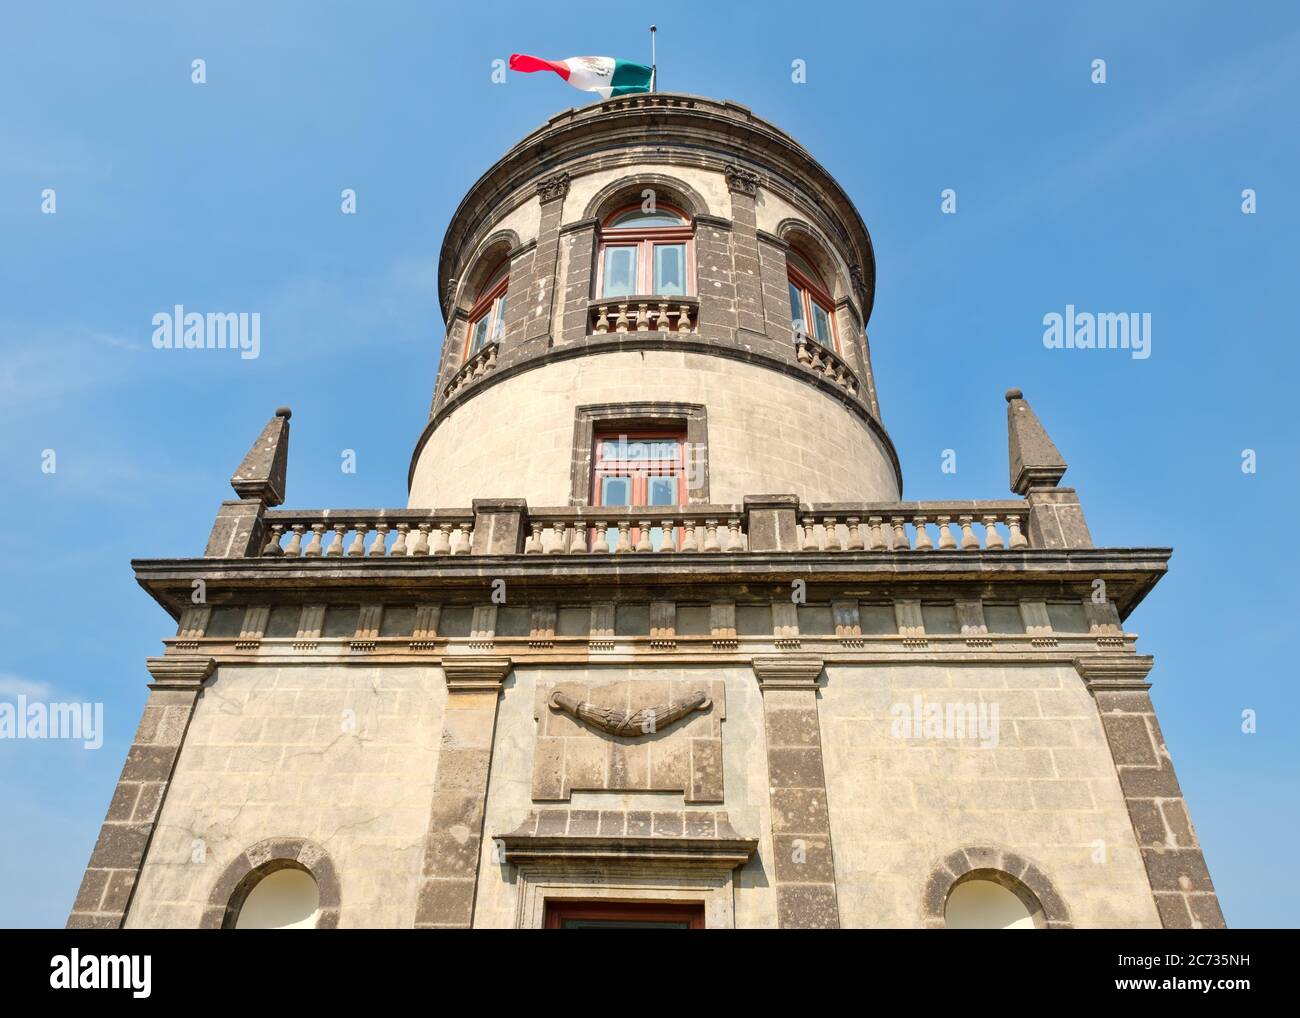 Tower with a mexican flag at Chapultepec Castle in Mexico City Stock Photo